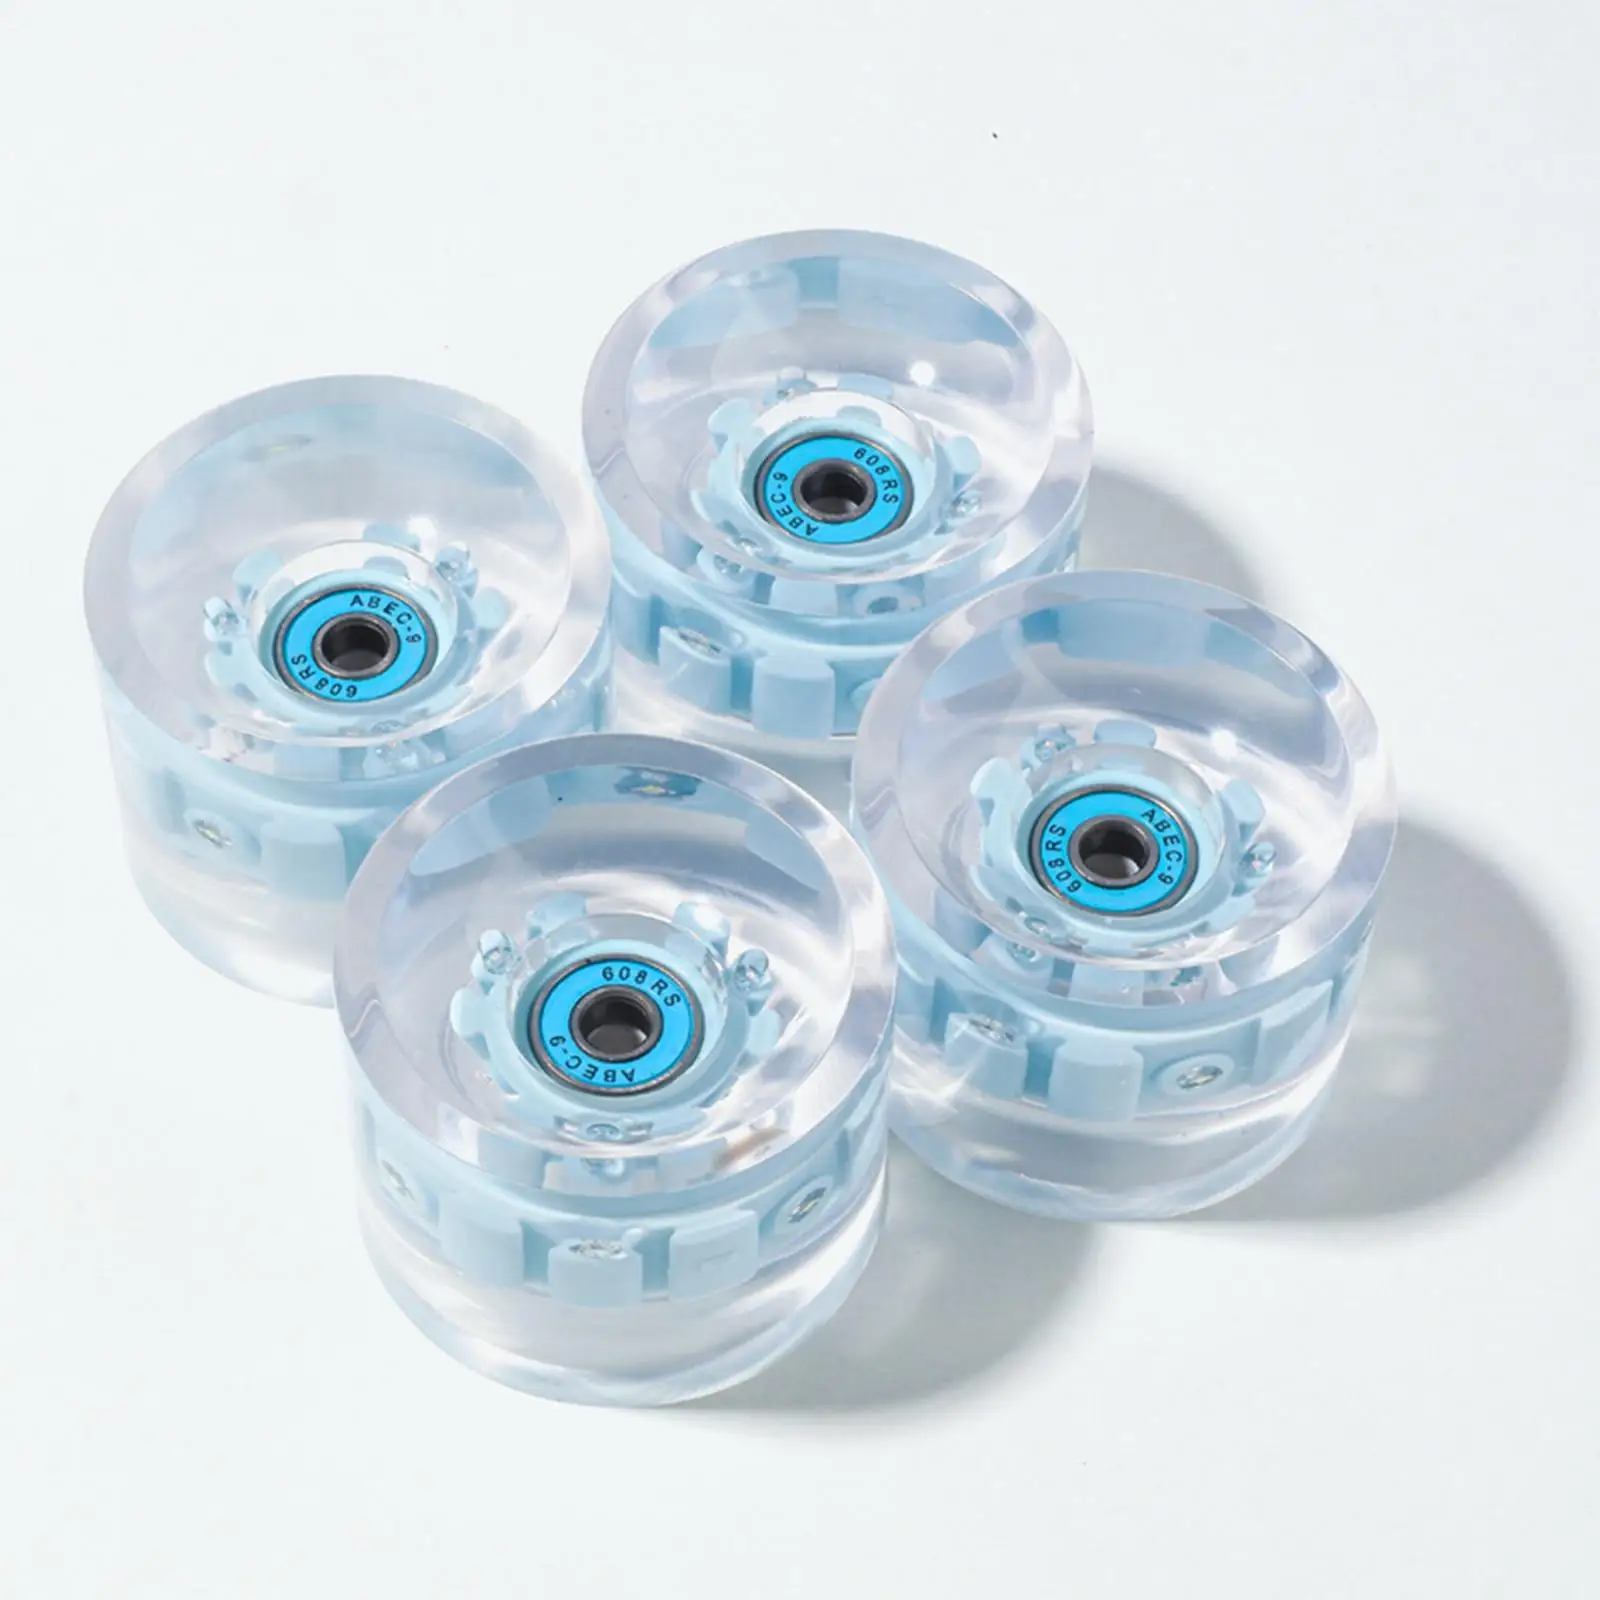 Skateboard Wheels 78A Hardness with Bearings Accessories Replacement Roller